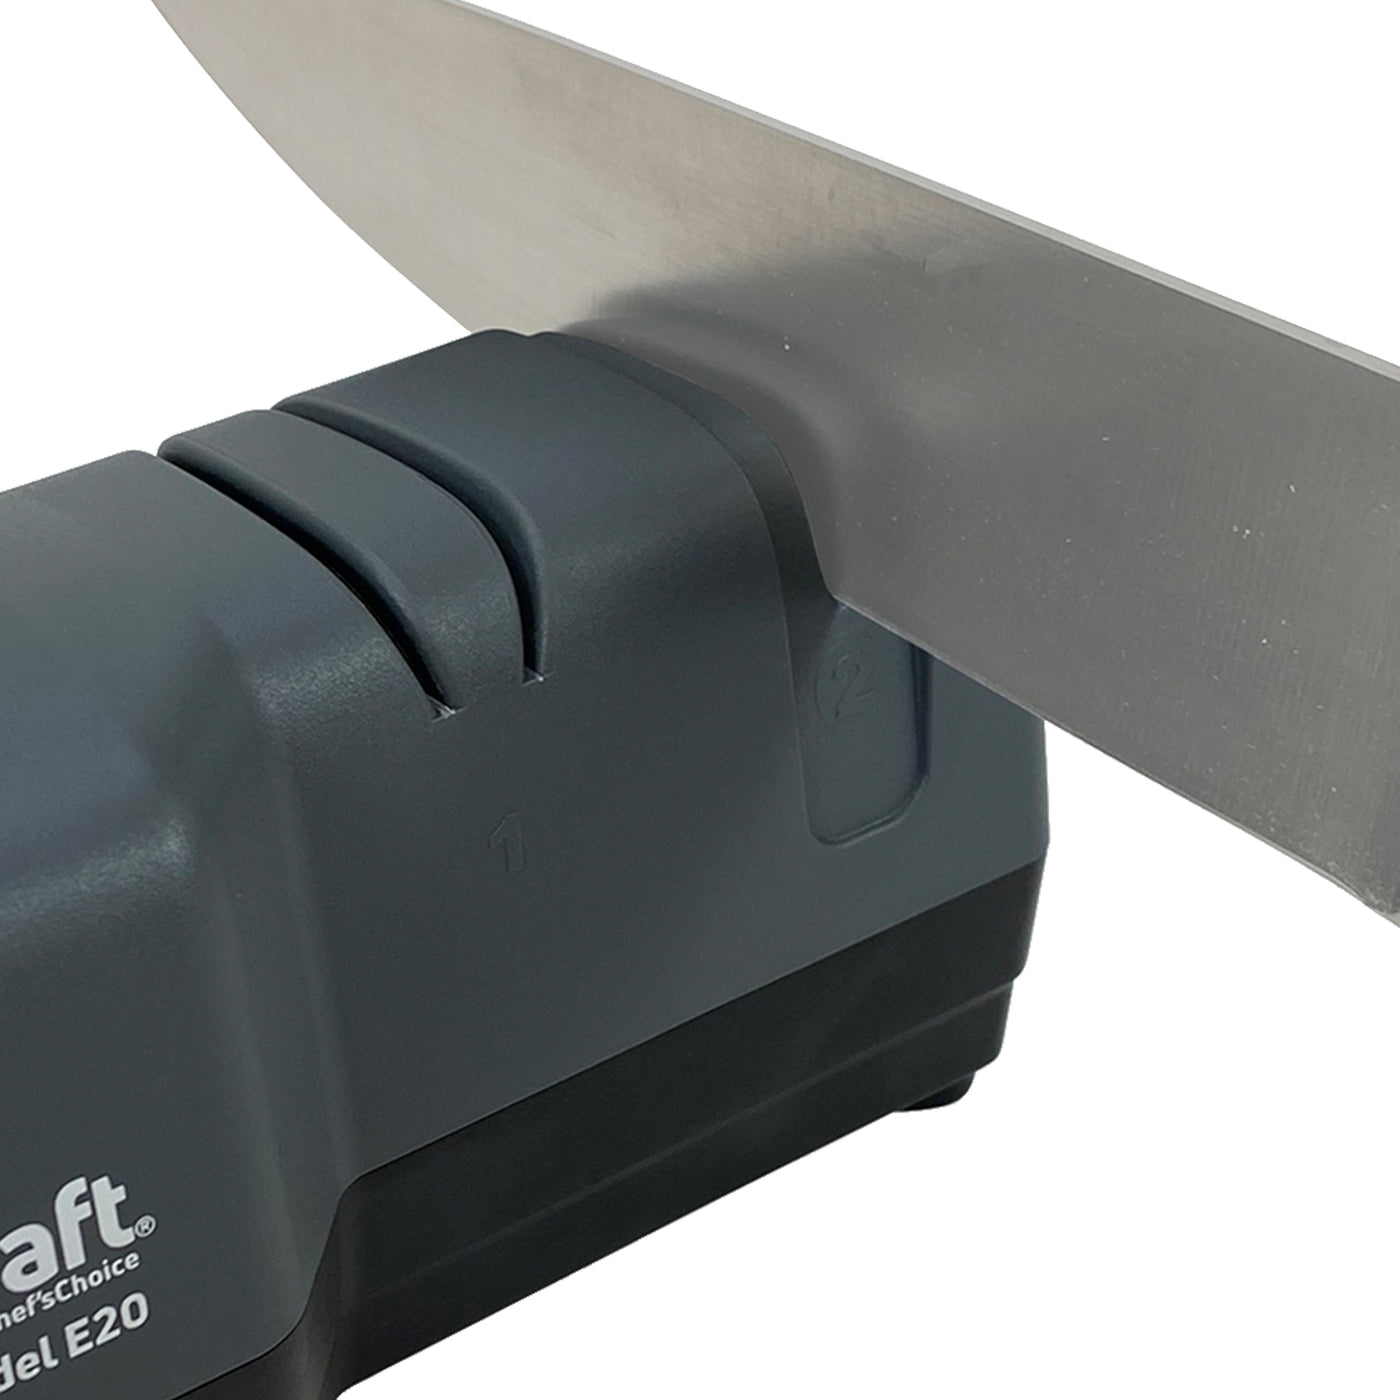 Edgecraft Model E4635 Angleselect Manual Knife Sharpener, 2-stage 15 Or 20- degree Dizor, In Gray (she635gy12) : Target